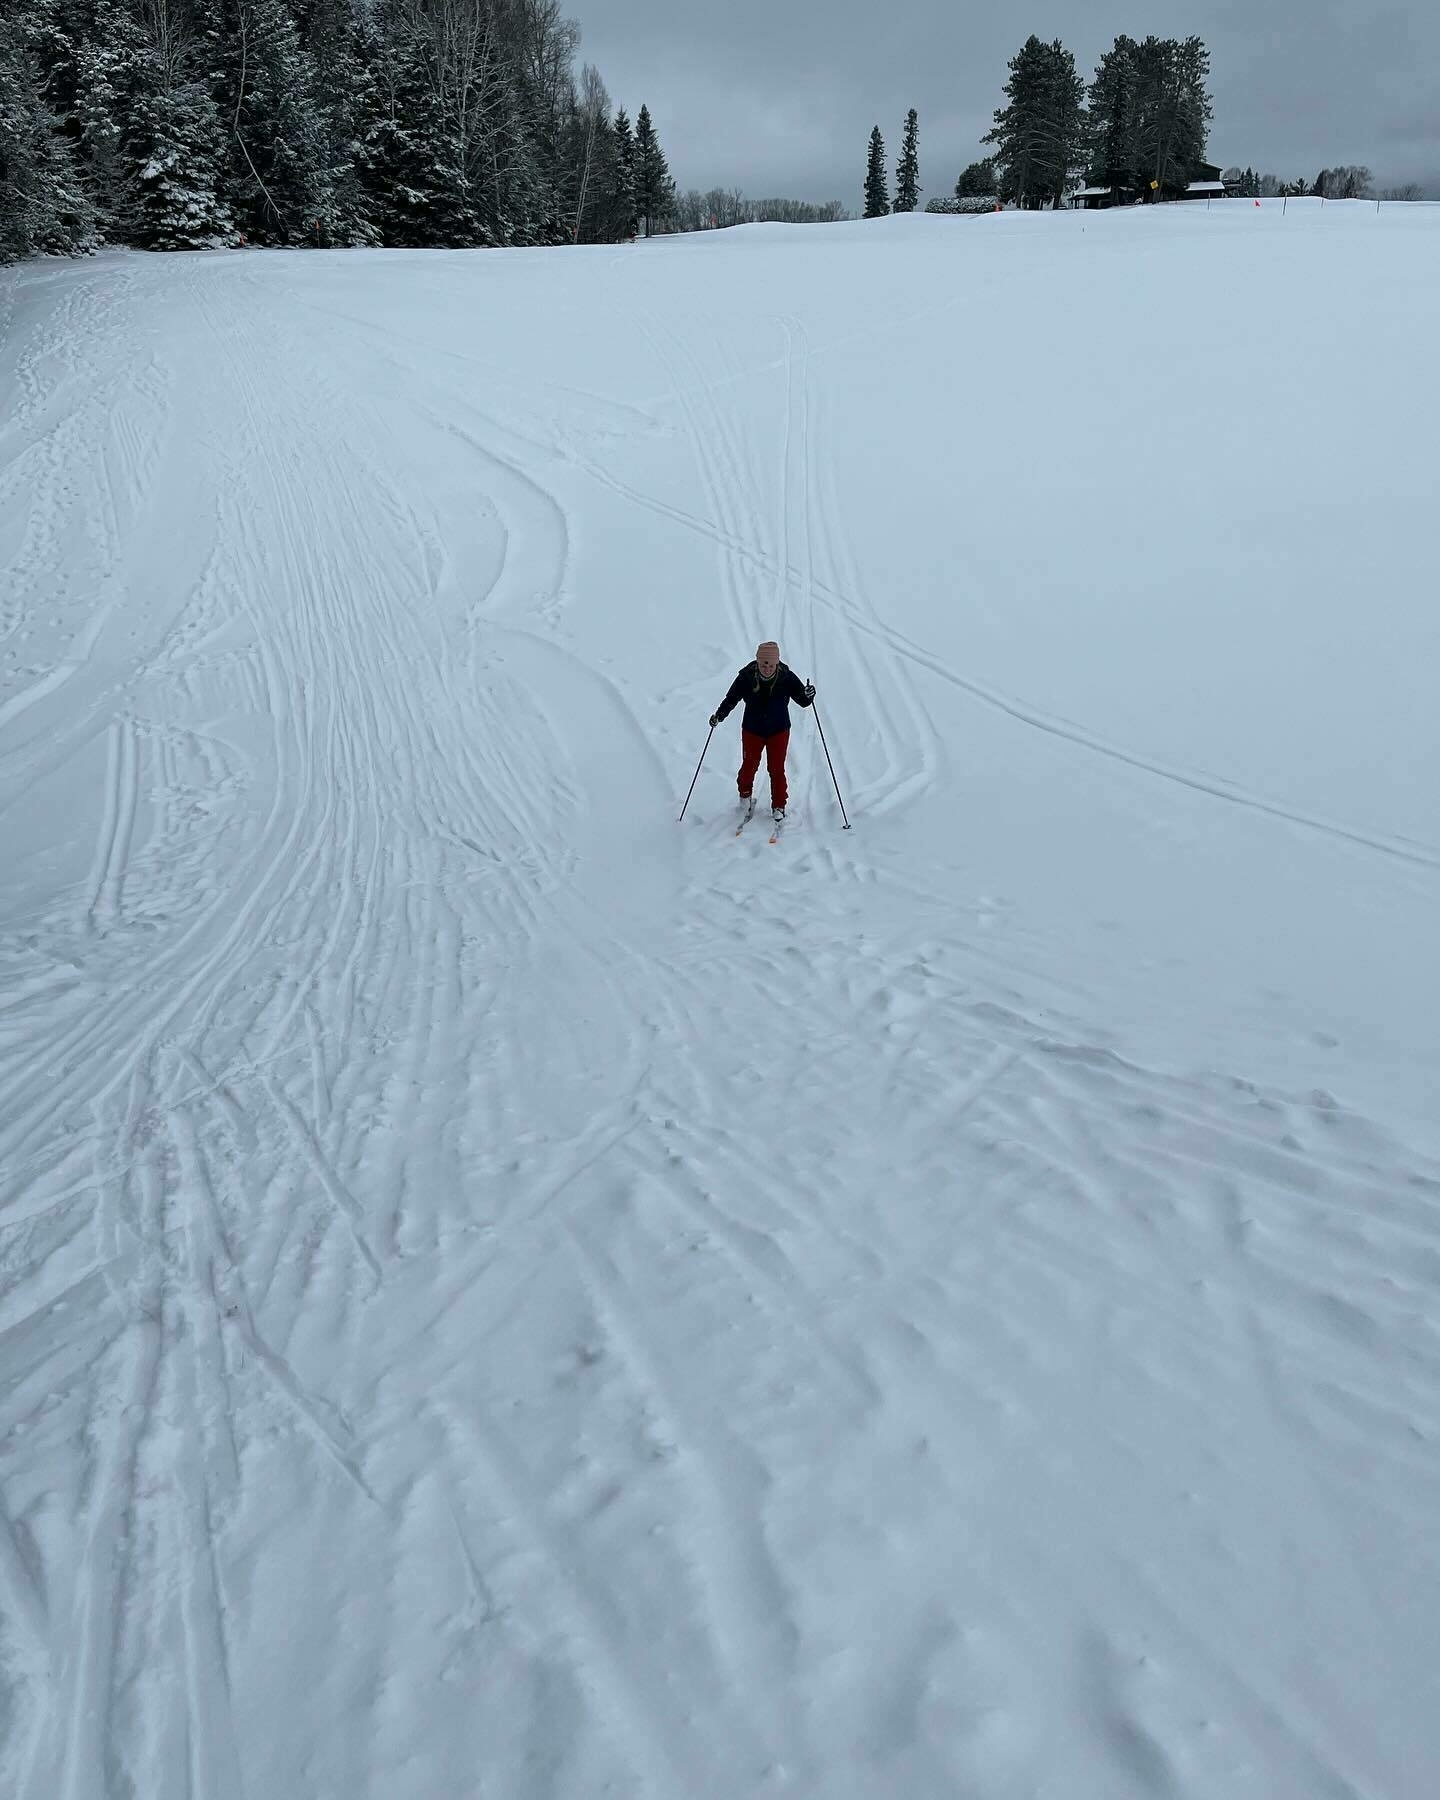 A person cross-country skiing on a snowy track with trees and overcast sky in the background.